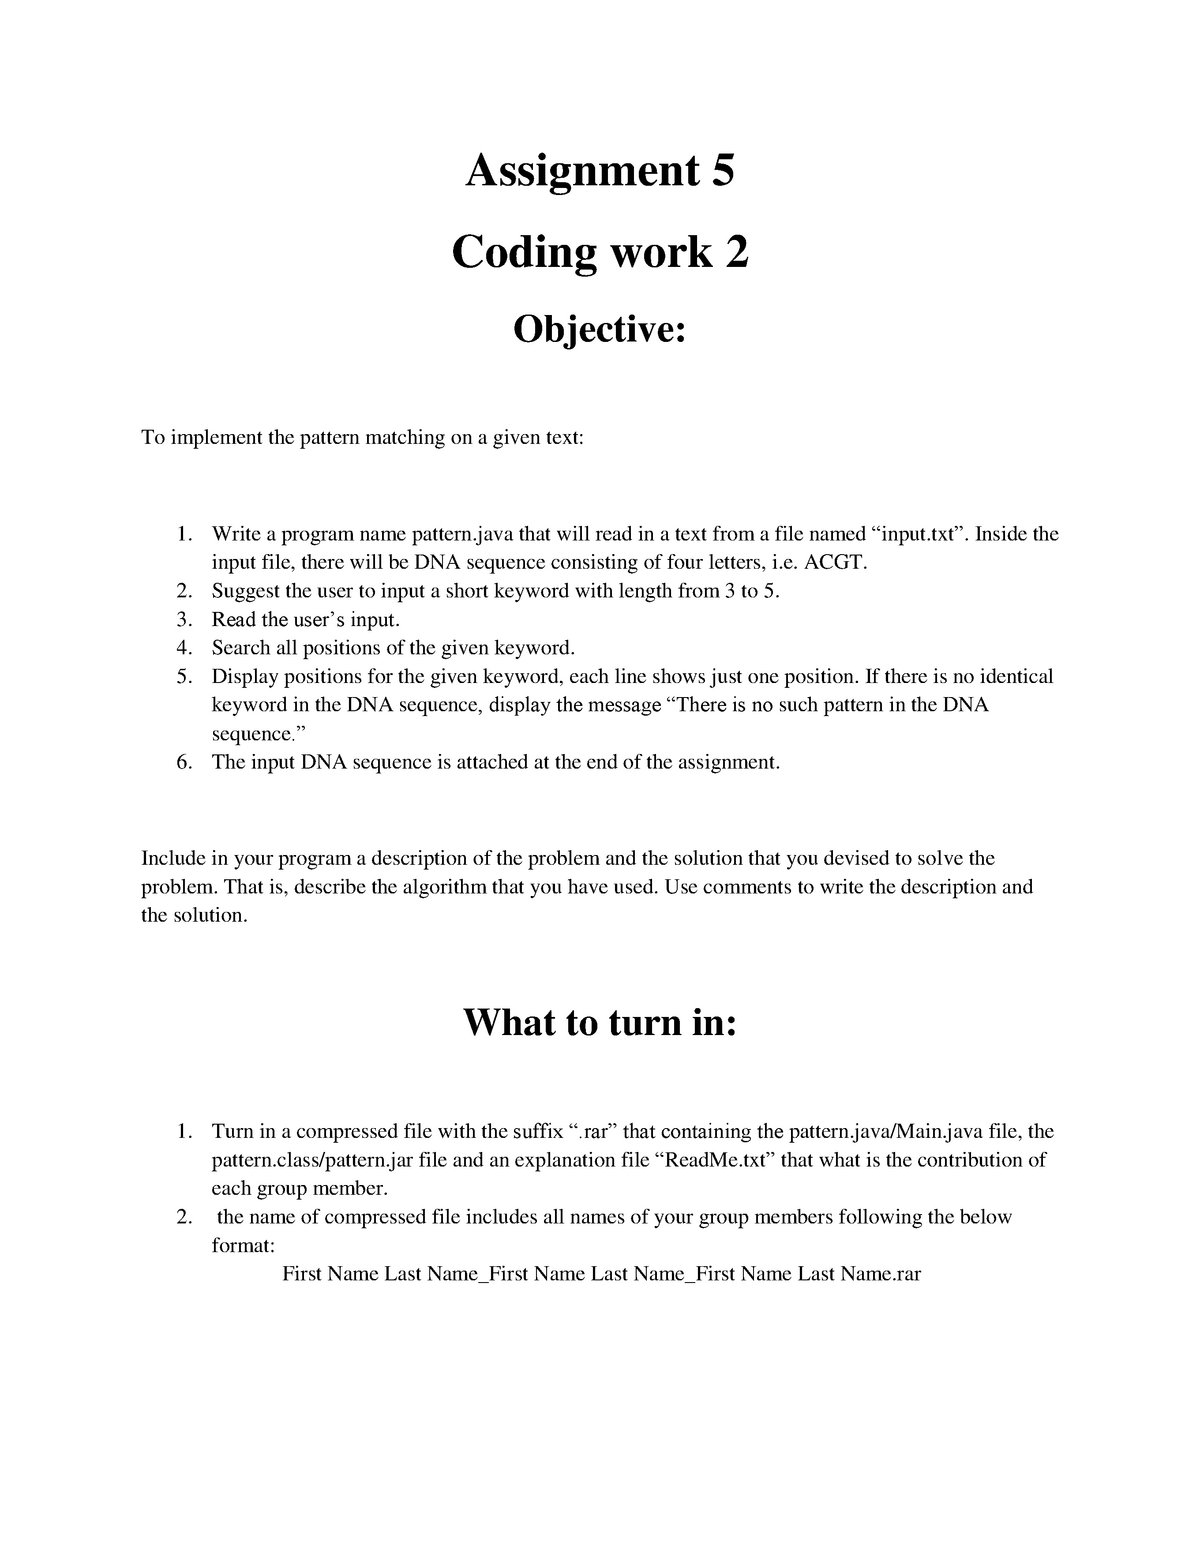 assignment for coding